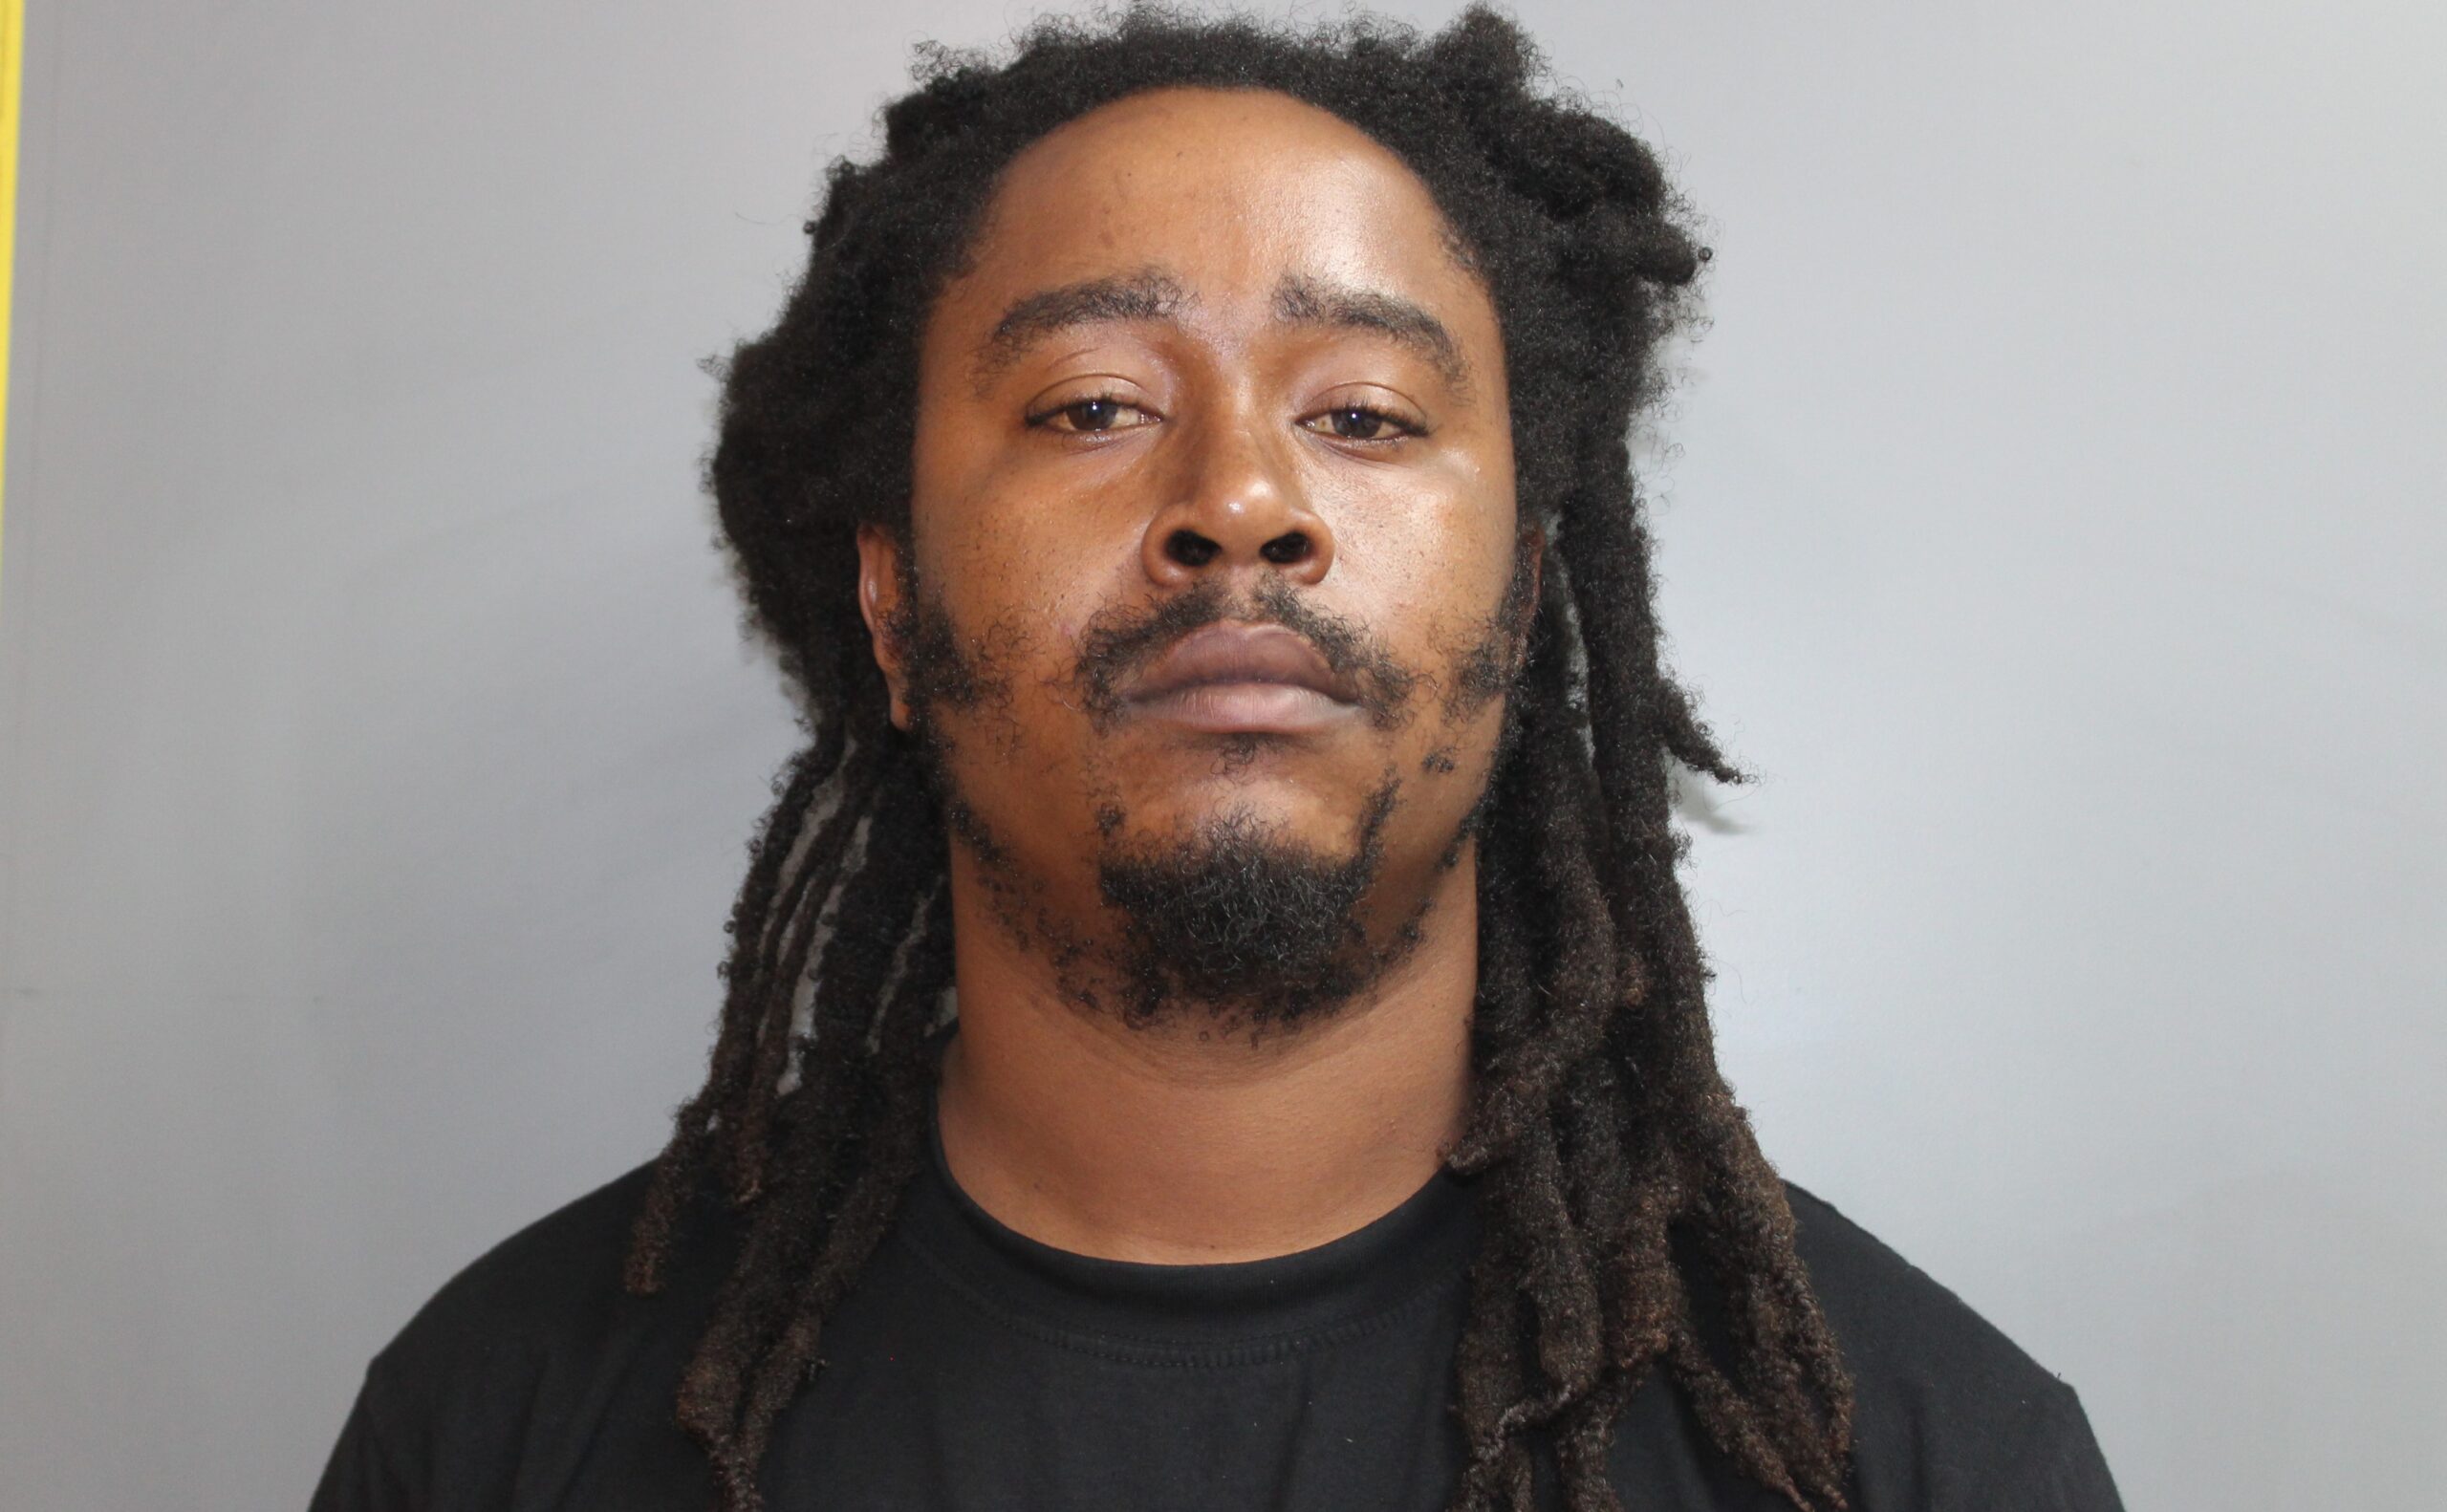 Police Need Your Help To Find Raheem Matthew Wanted For Gun, Drug Possession: VIPD